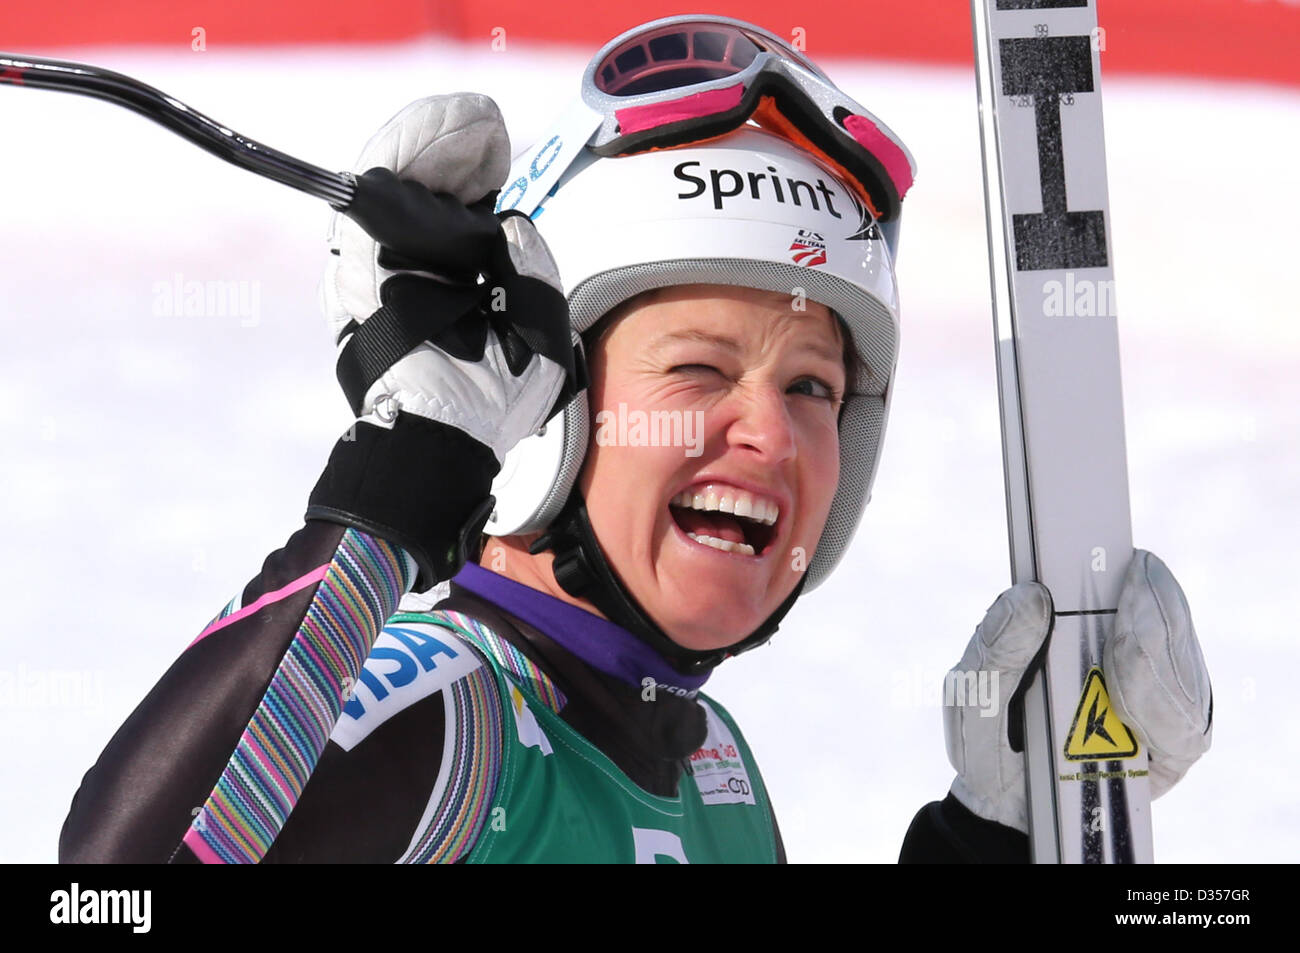 Julia Mancuso of US reacts during the women's downhill event at the Alpine Skiing World Championships in Schladming, Austria, 10 February 2013. Photo: Karl-Josef Hildenbrand/dpa +++(c) dpa - Bildfunk+++ Stock Photo